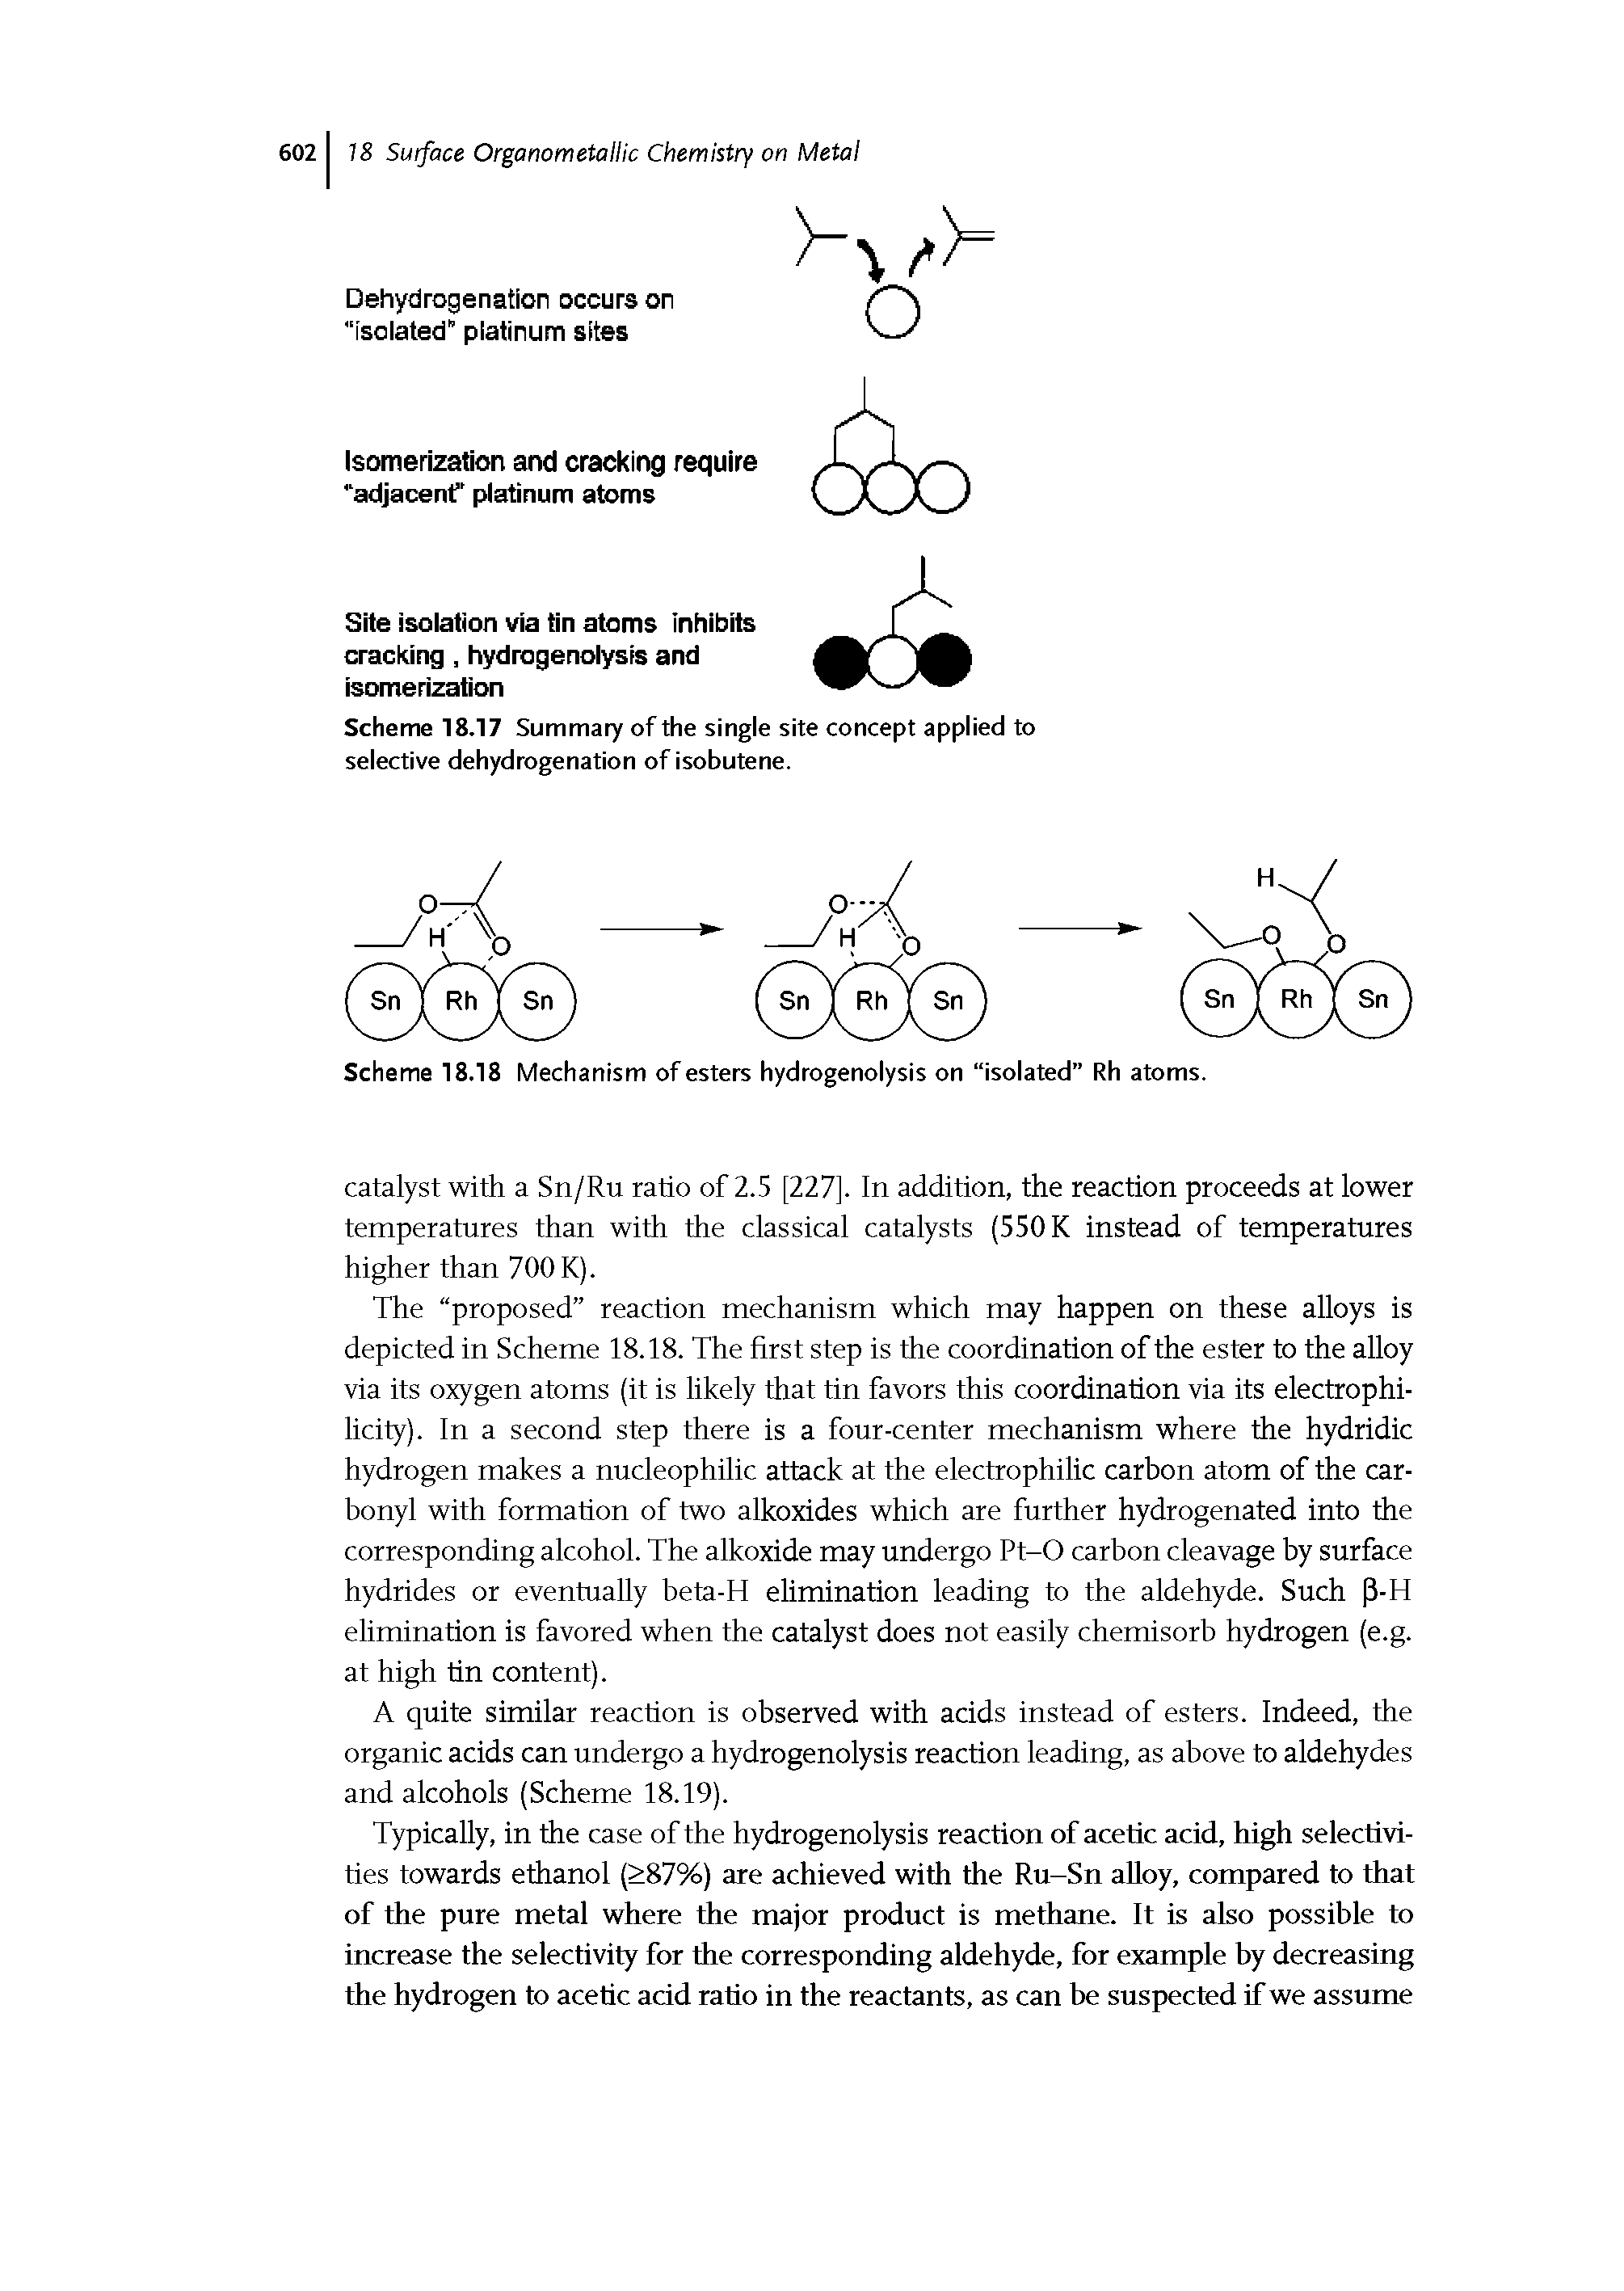 Scheme 18.17 Summary of the single site concept applied to selective dehydrogenation of isobutene.